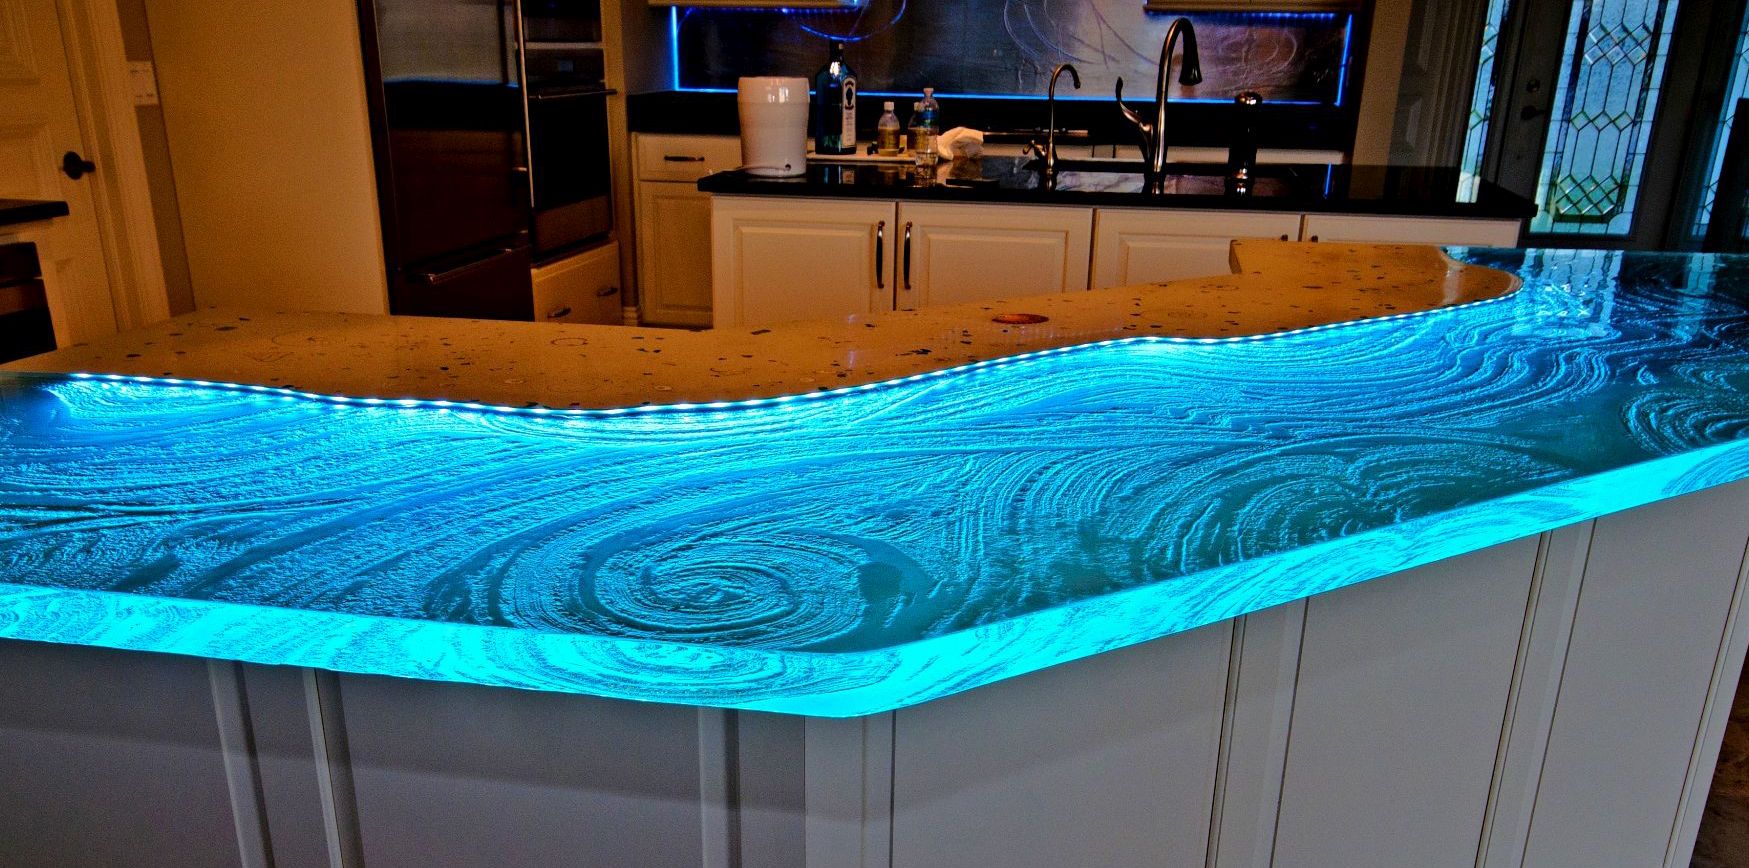 Recycled Glass Countertop Ideas, Diy Glass Countertops